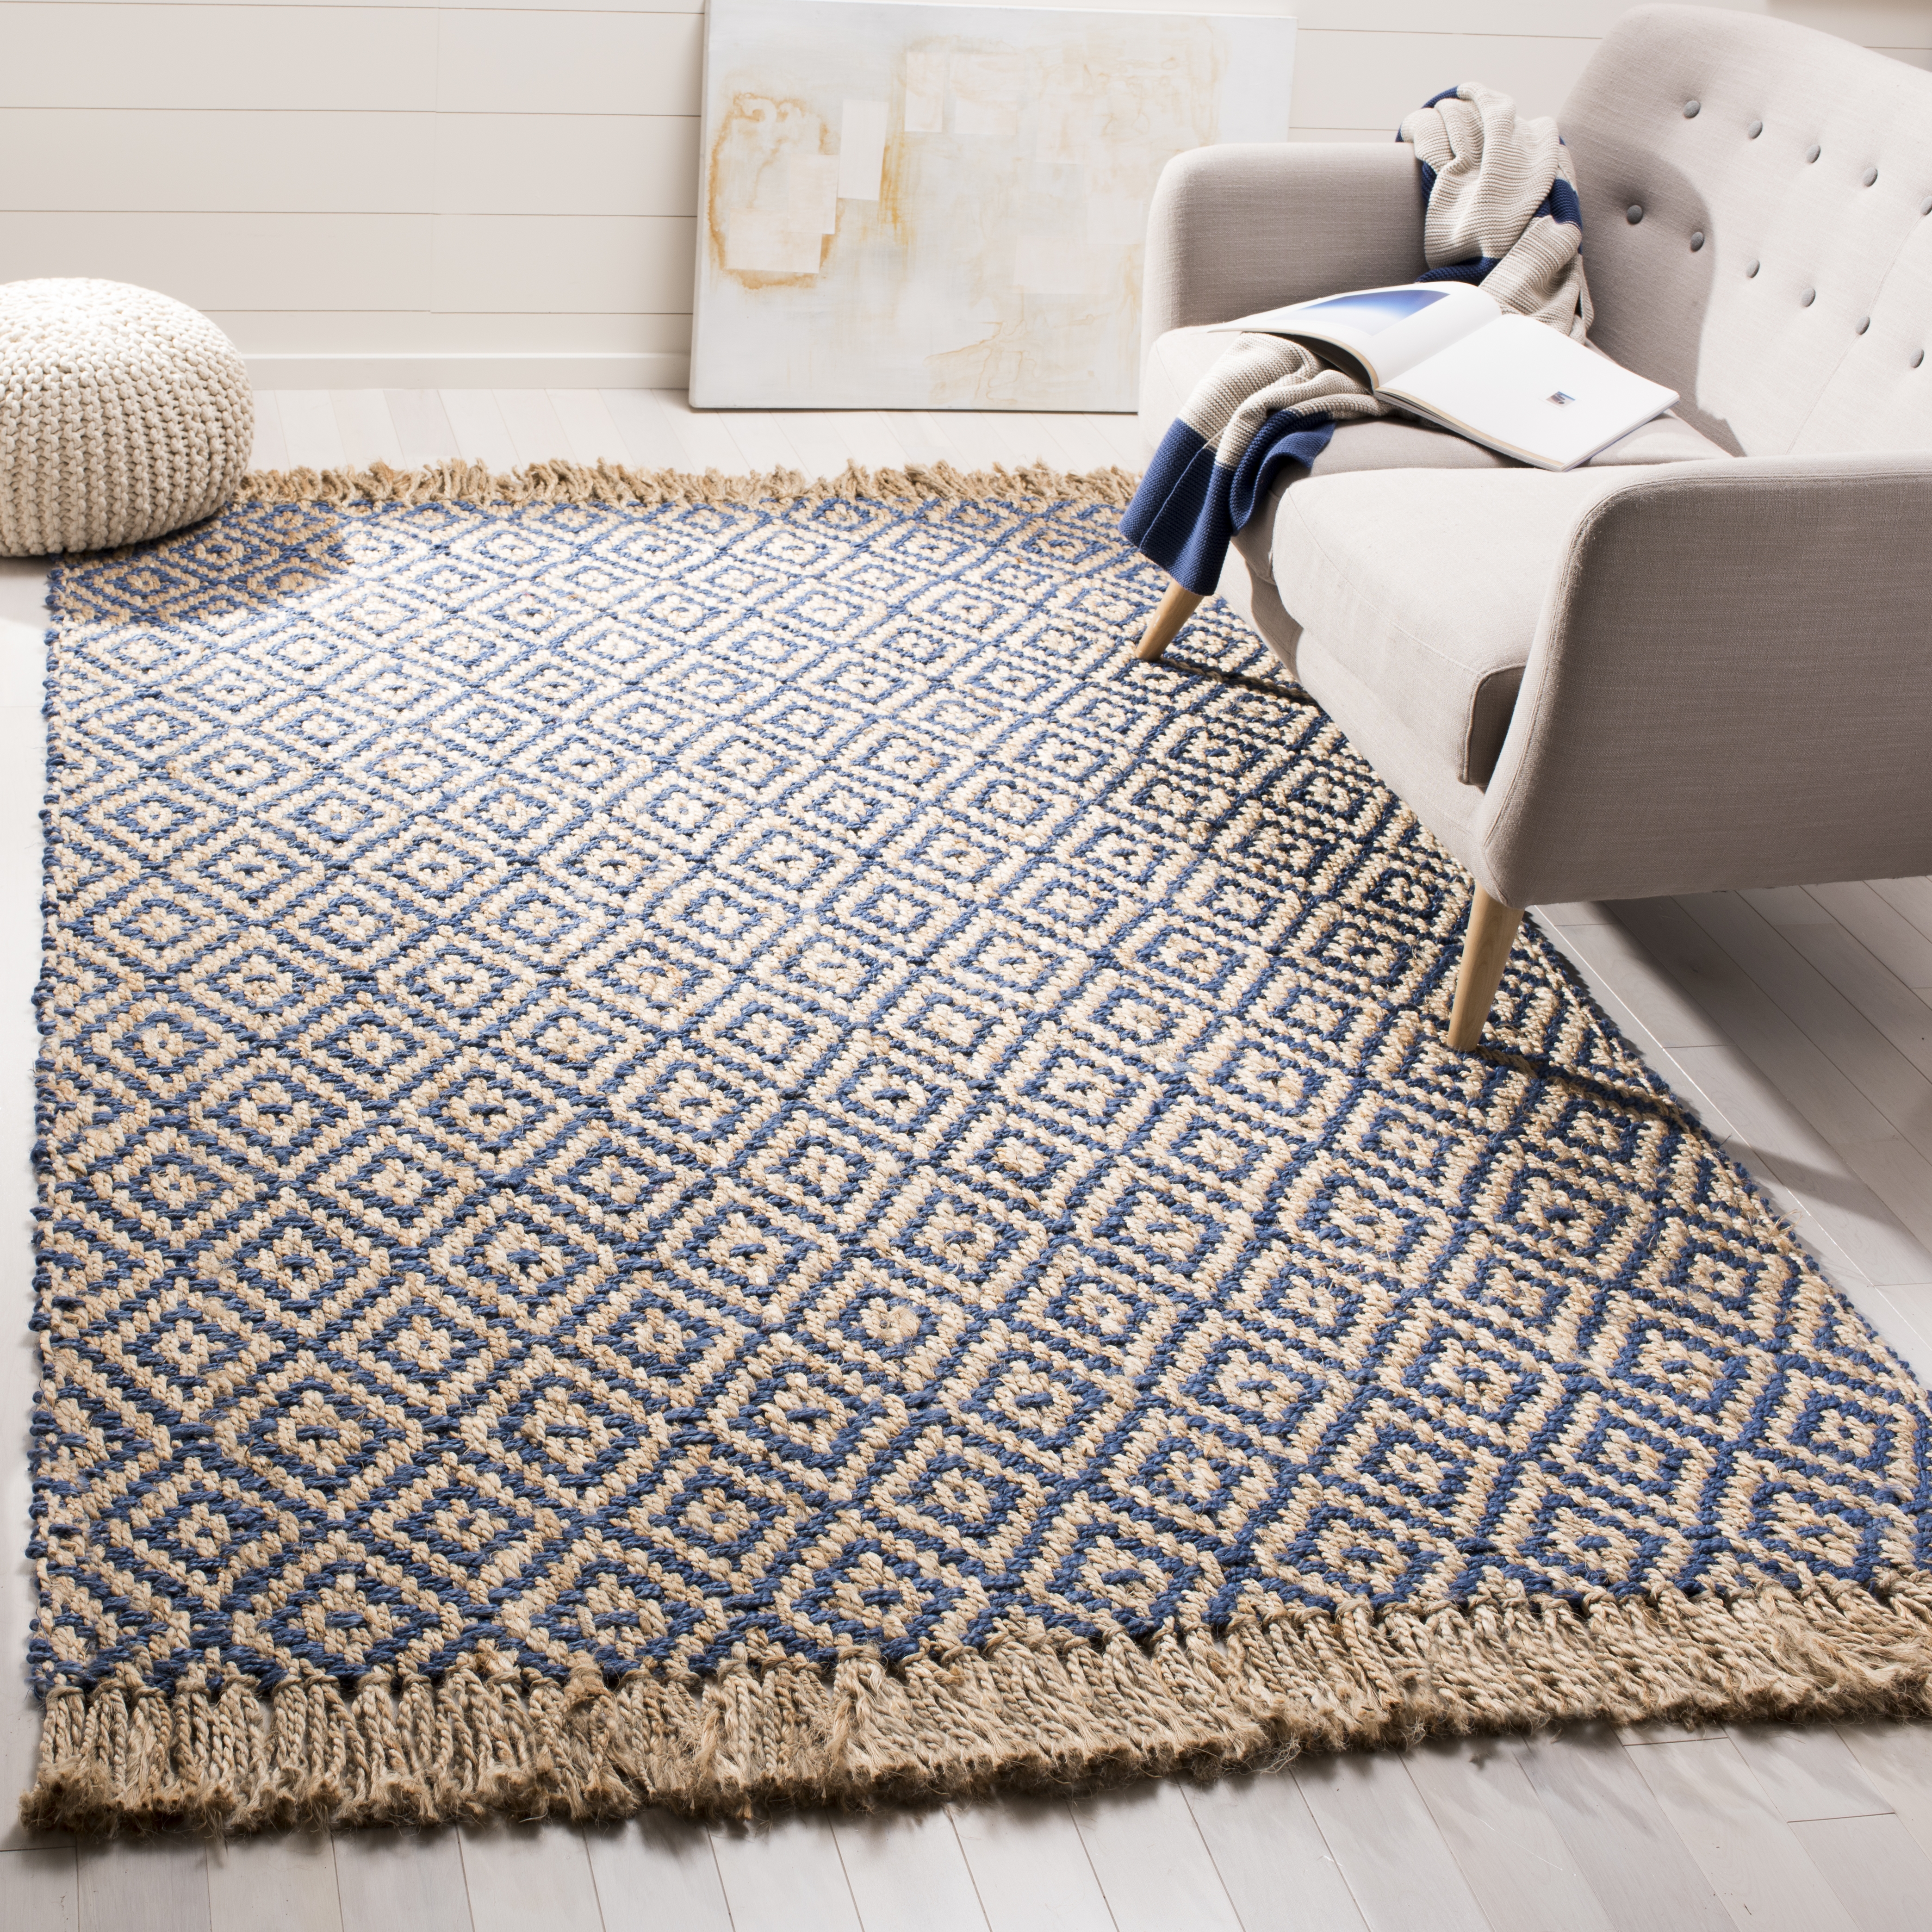 Arlo Home Hand Woven Area Rug, NF266D, Tropical Blue/Natural,  4' X 6' - Image 1